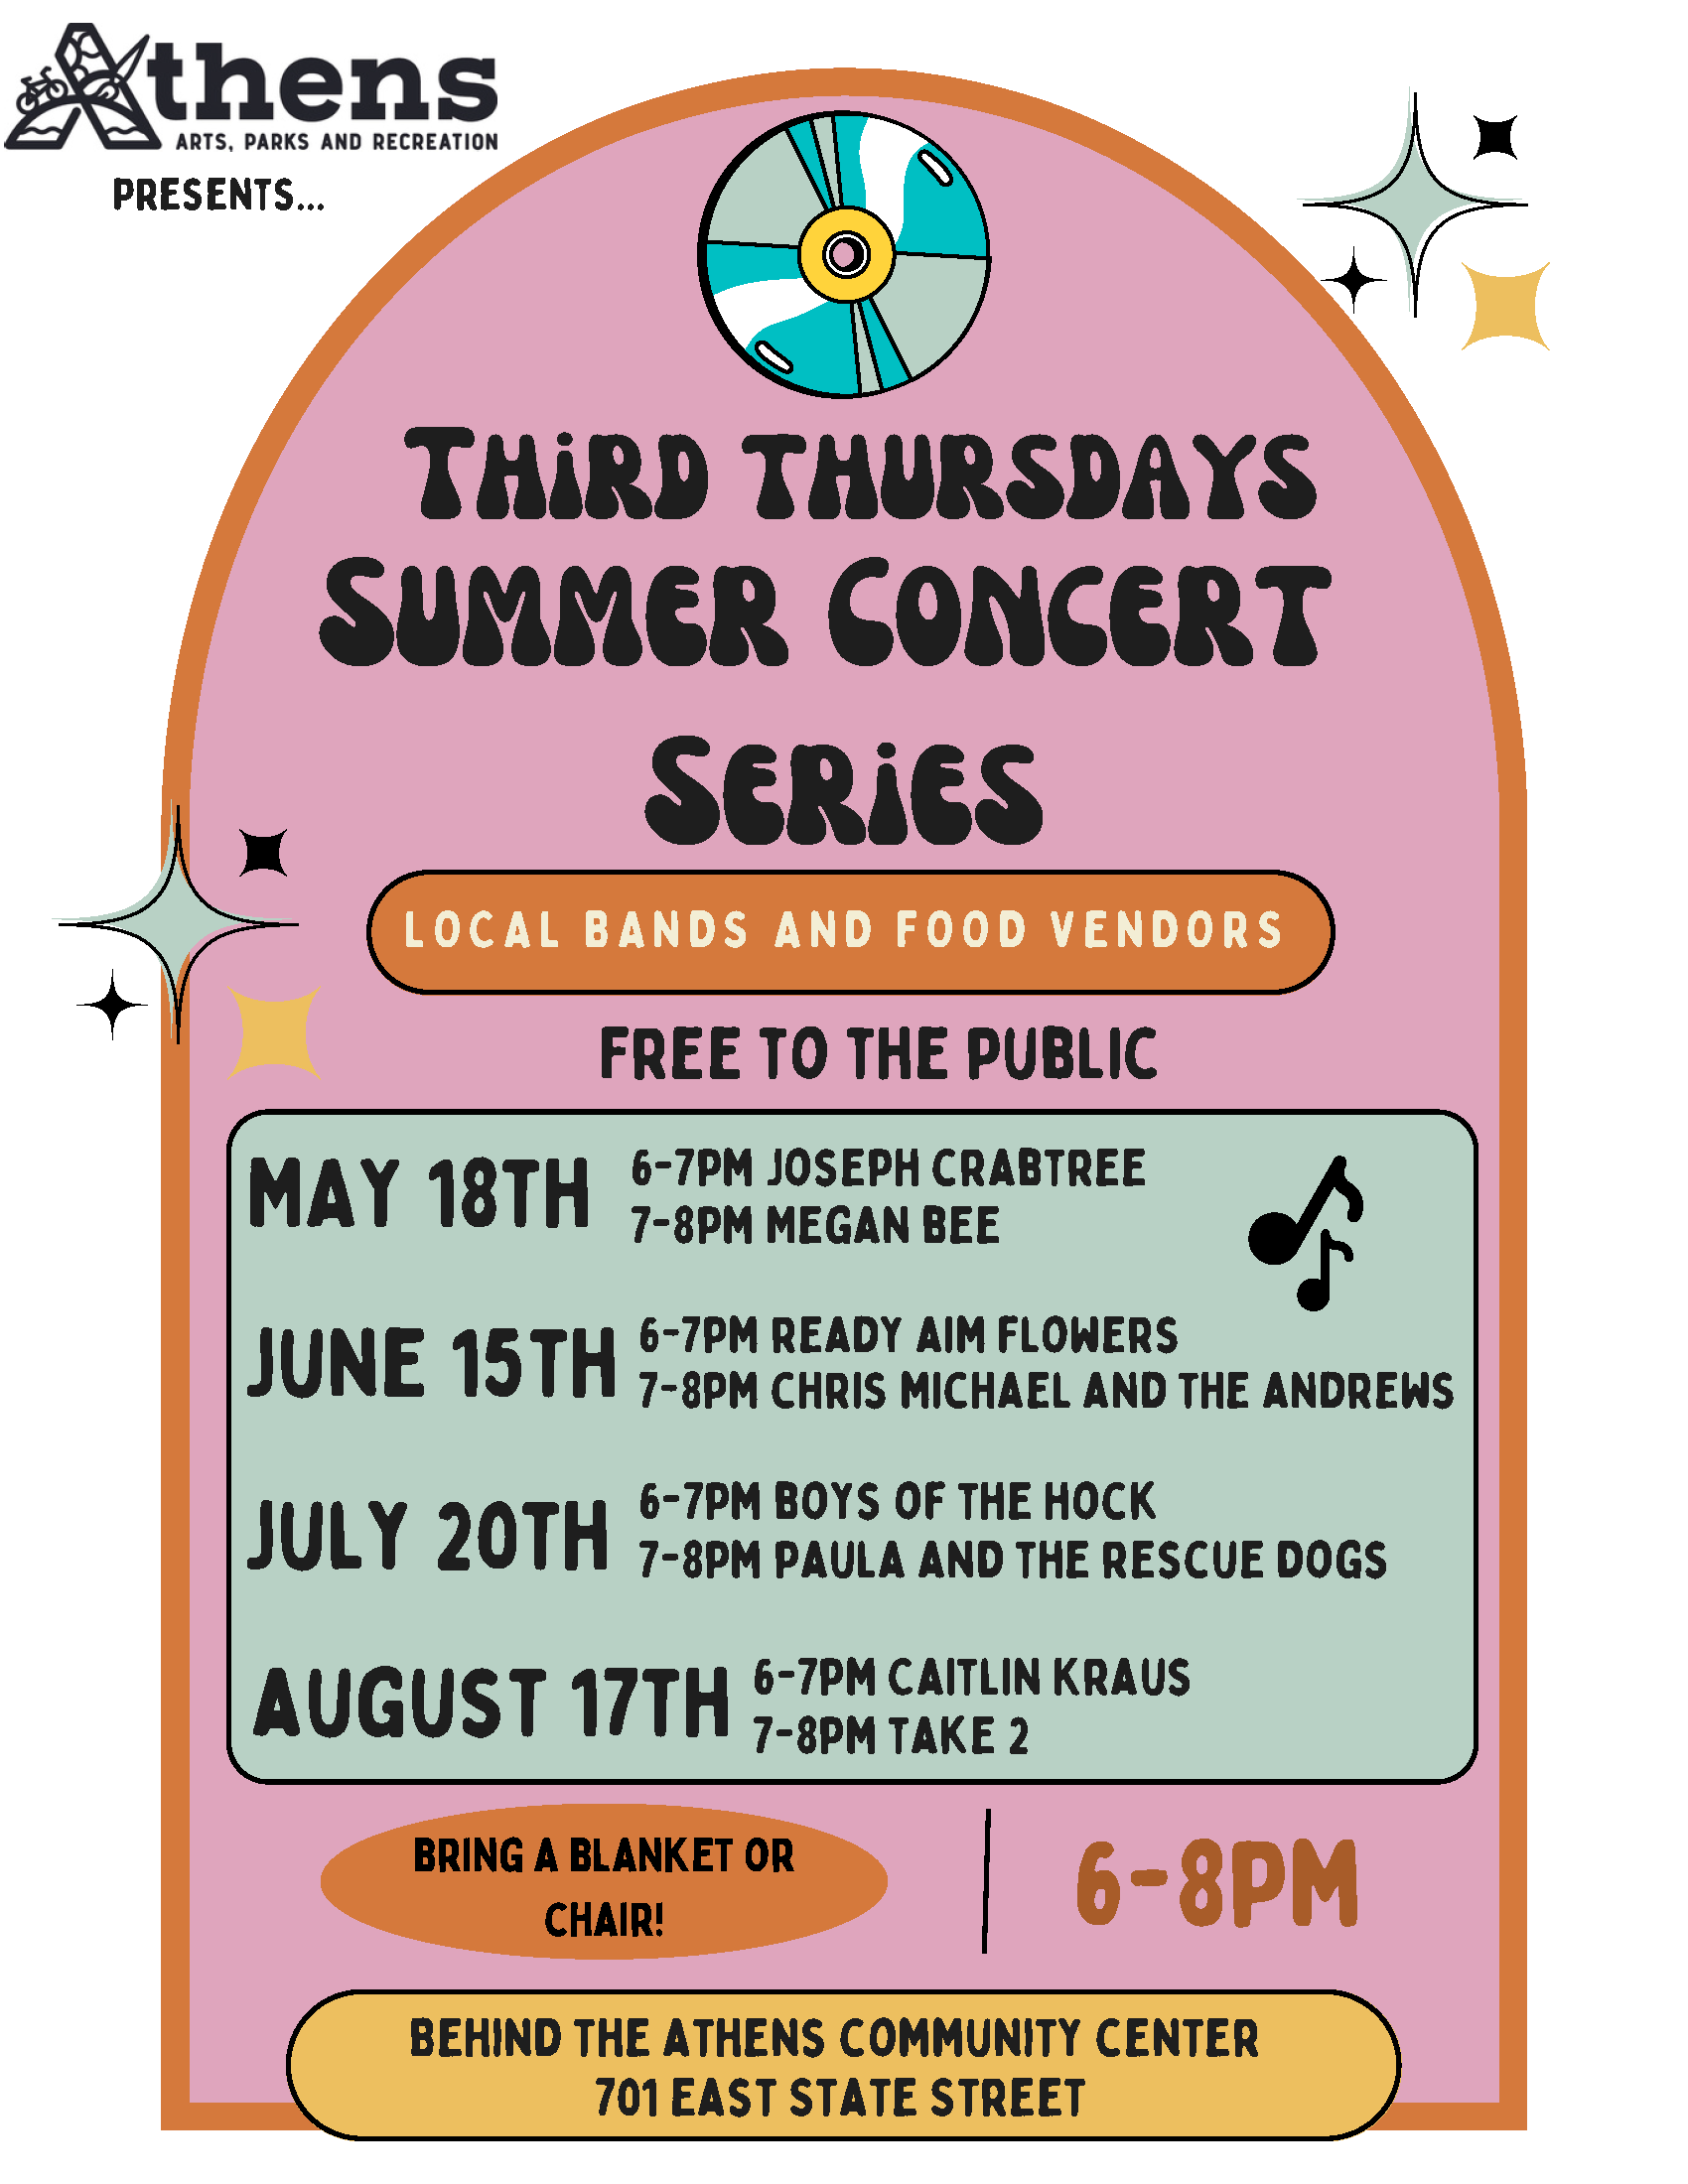 An image detailing the summer concert series, the information is included in the body of the listing.